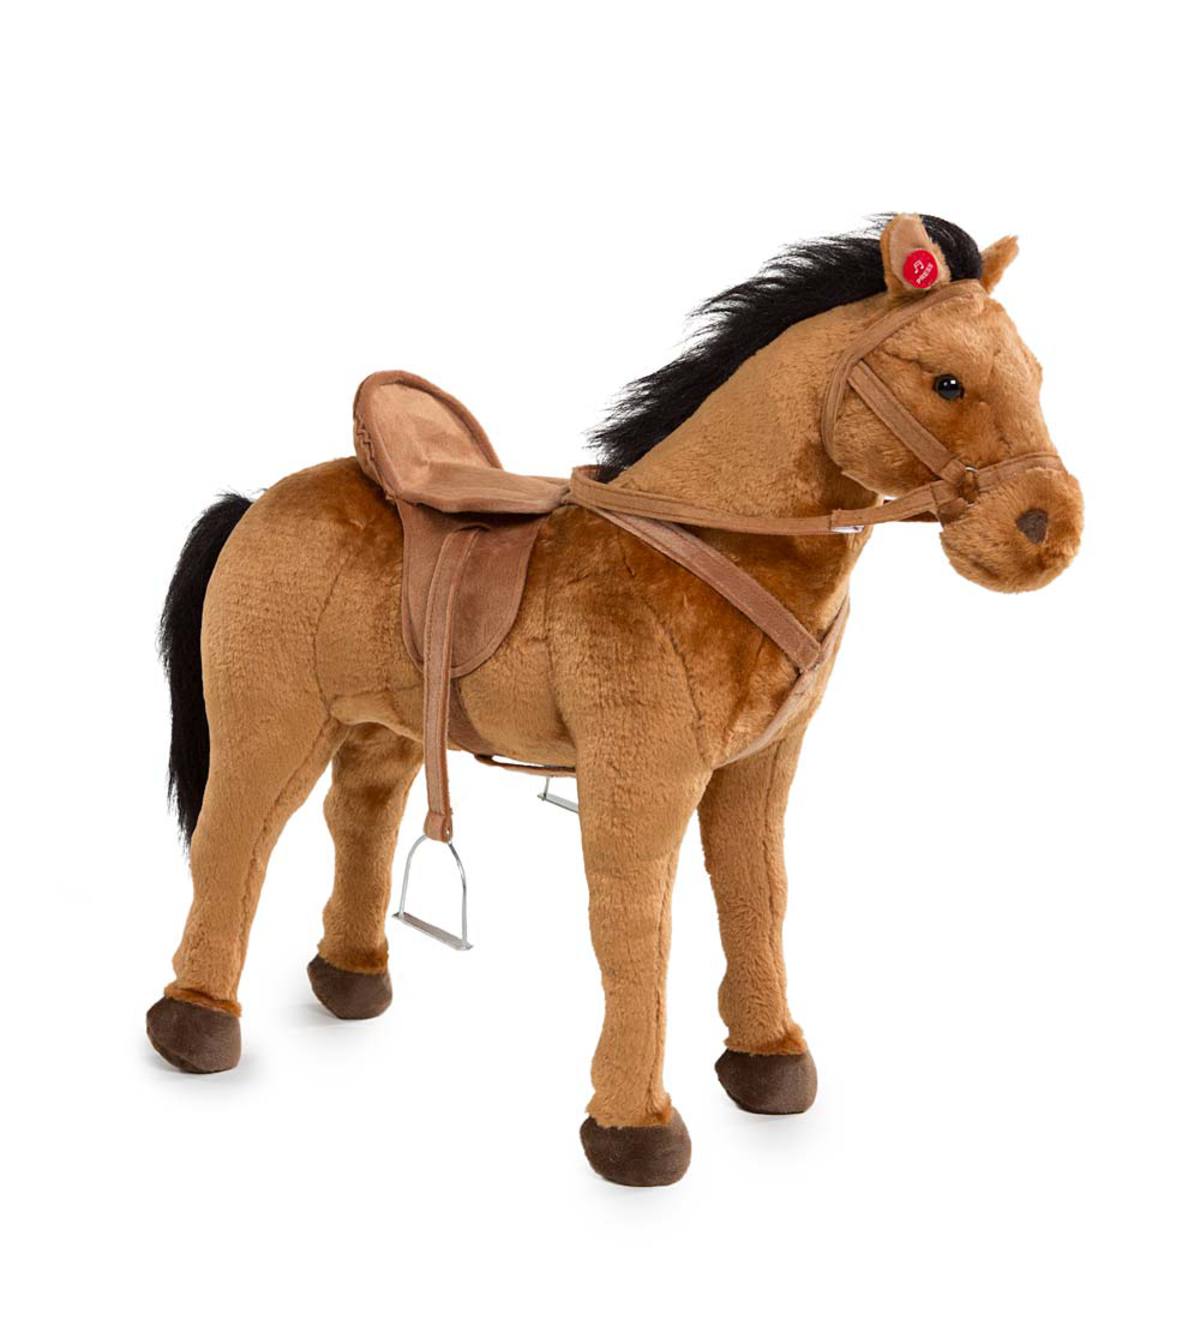 Plush Sit-On Horse Toy - Brown | PlowHearth